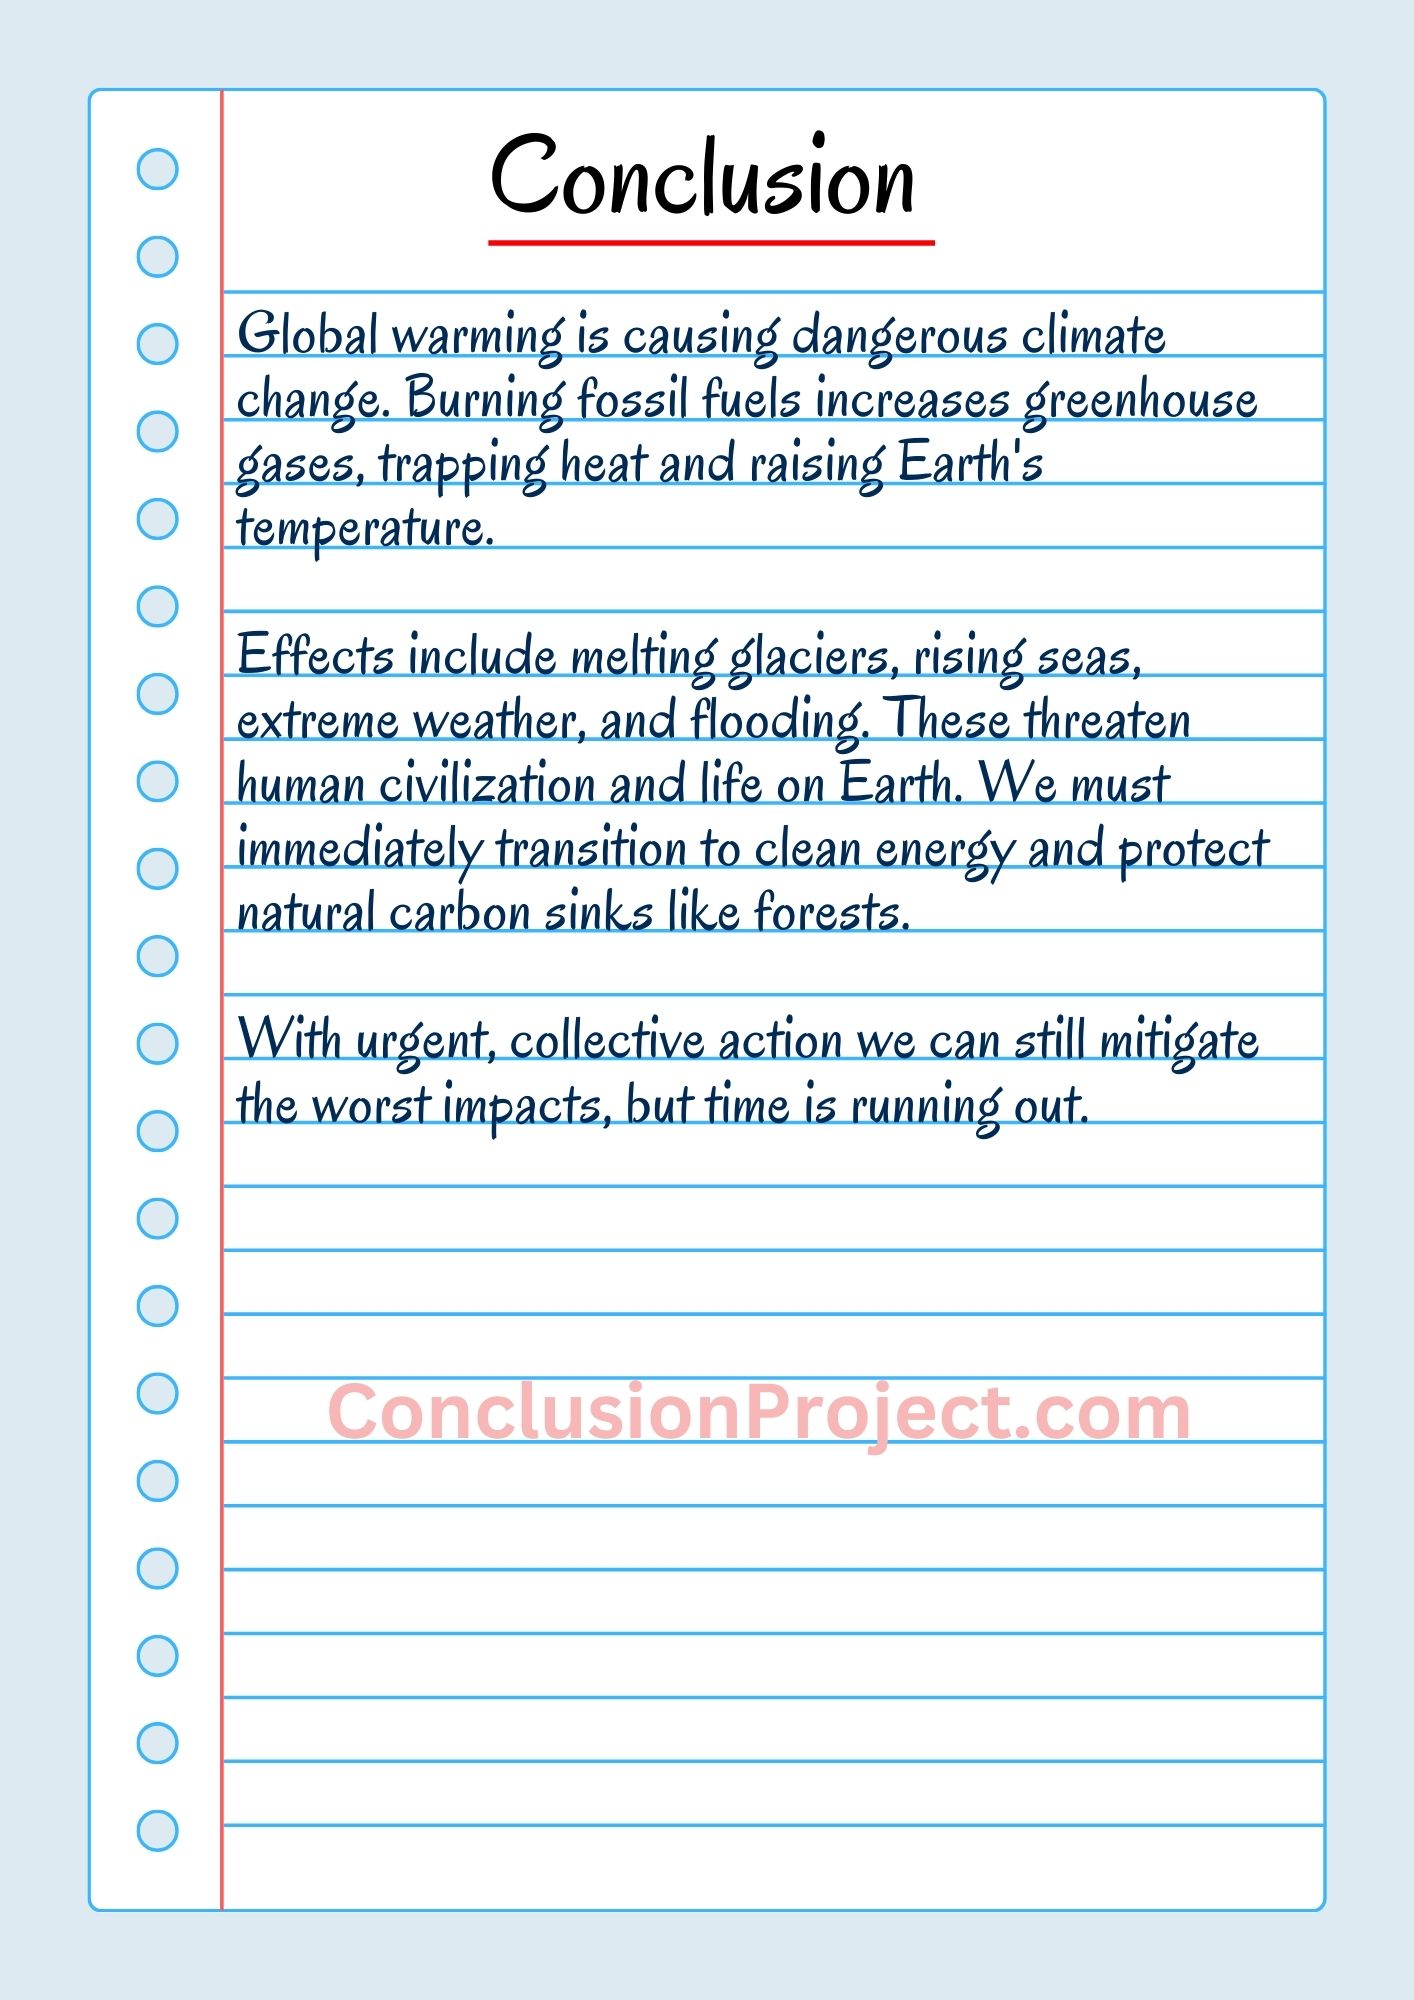 Conclusion of Global Warming